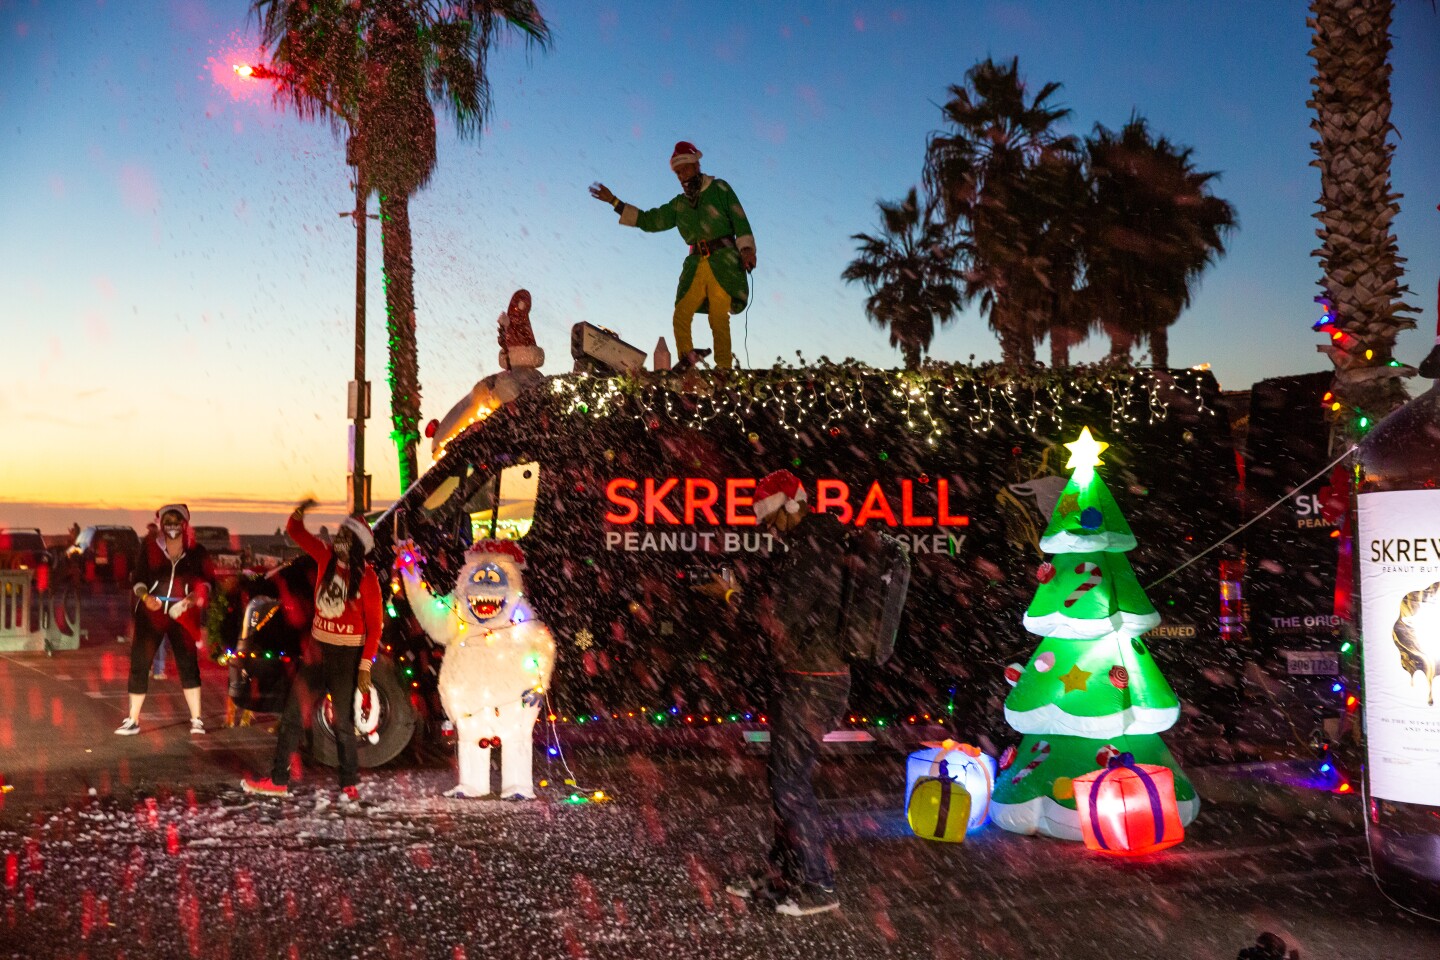 A crew from Skrewball whiskey gets in the holiday spirit during the Ocean Beach Holiday Parade on Dec. 5.